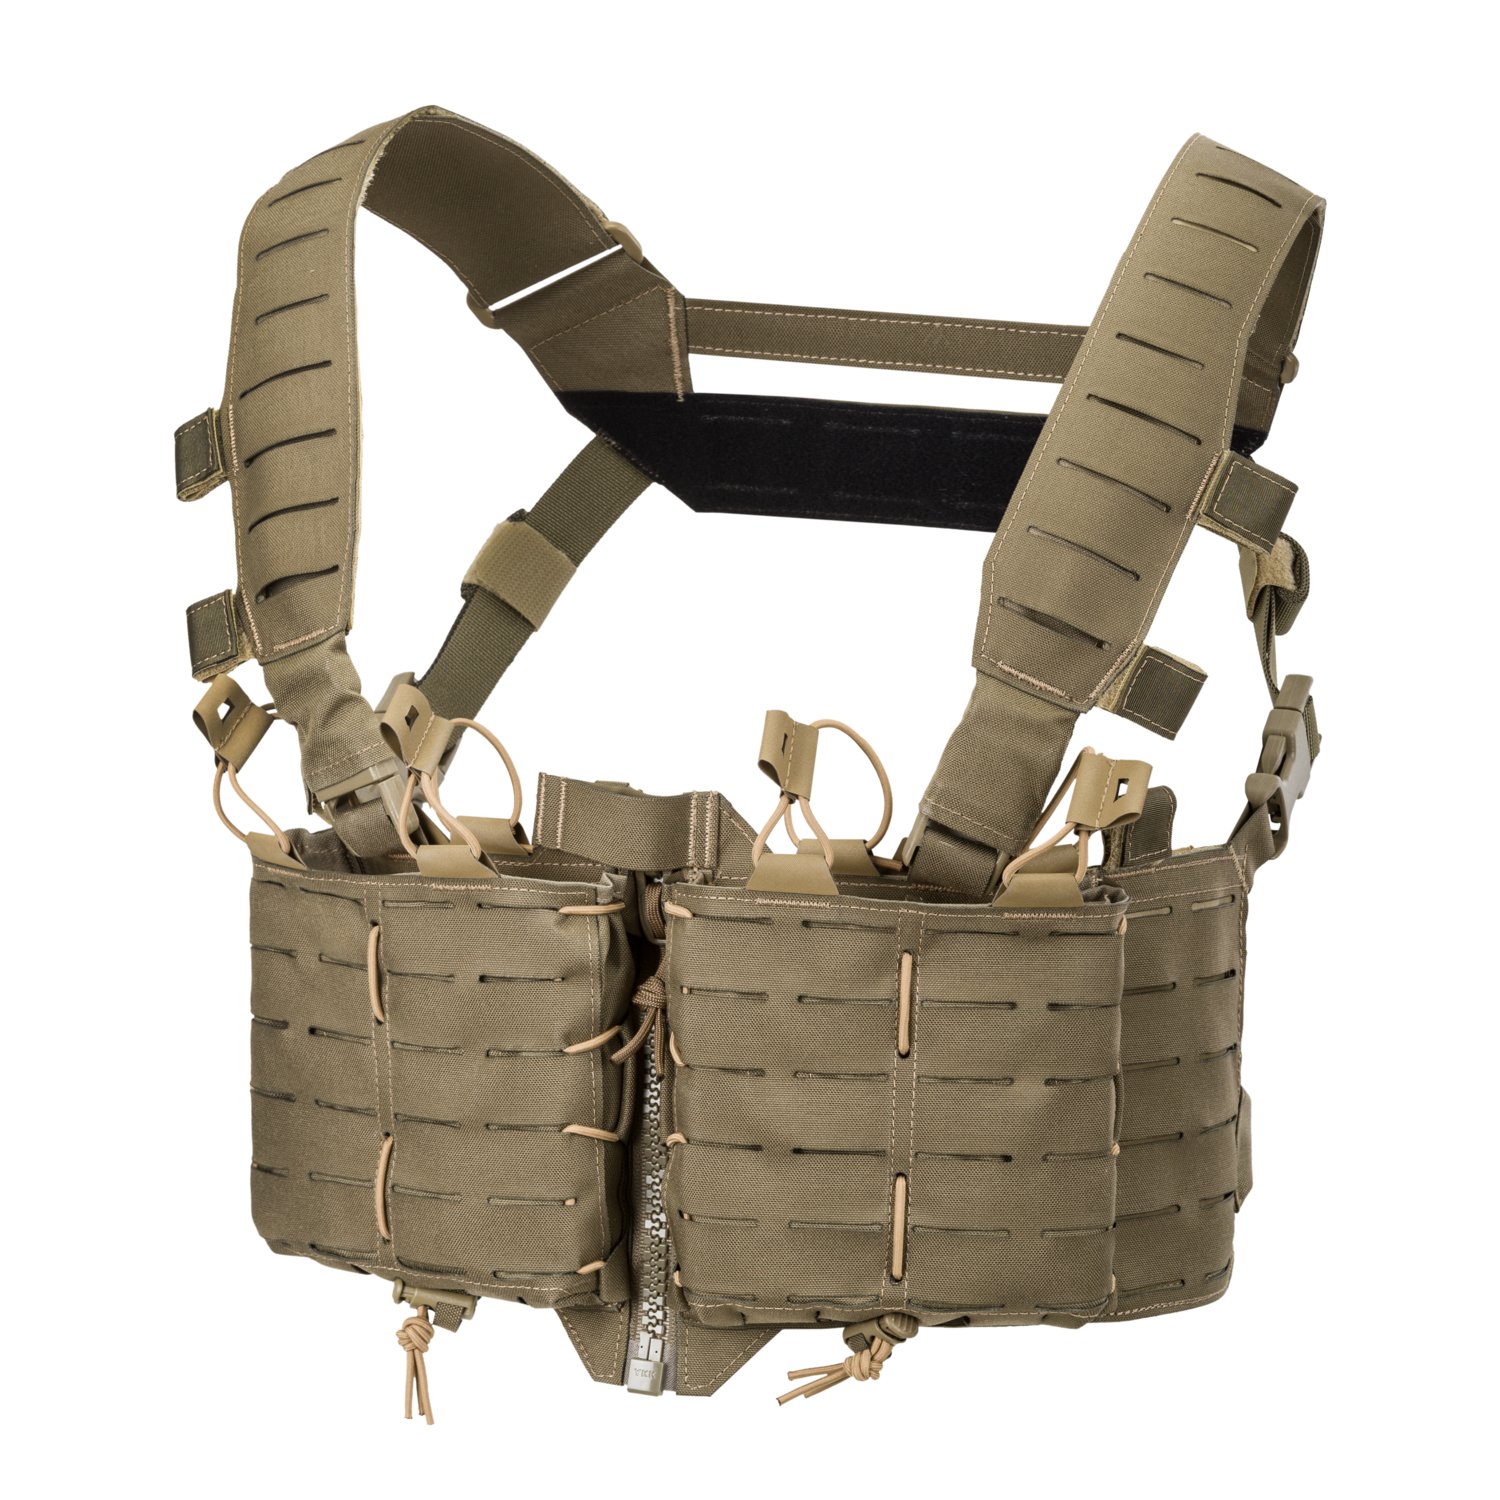 Tempest Chest Rig | On Duty Equipment Contract Division